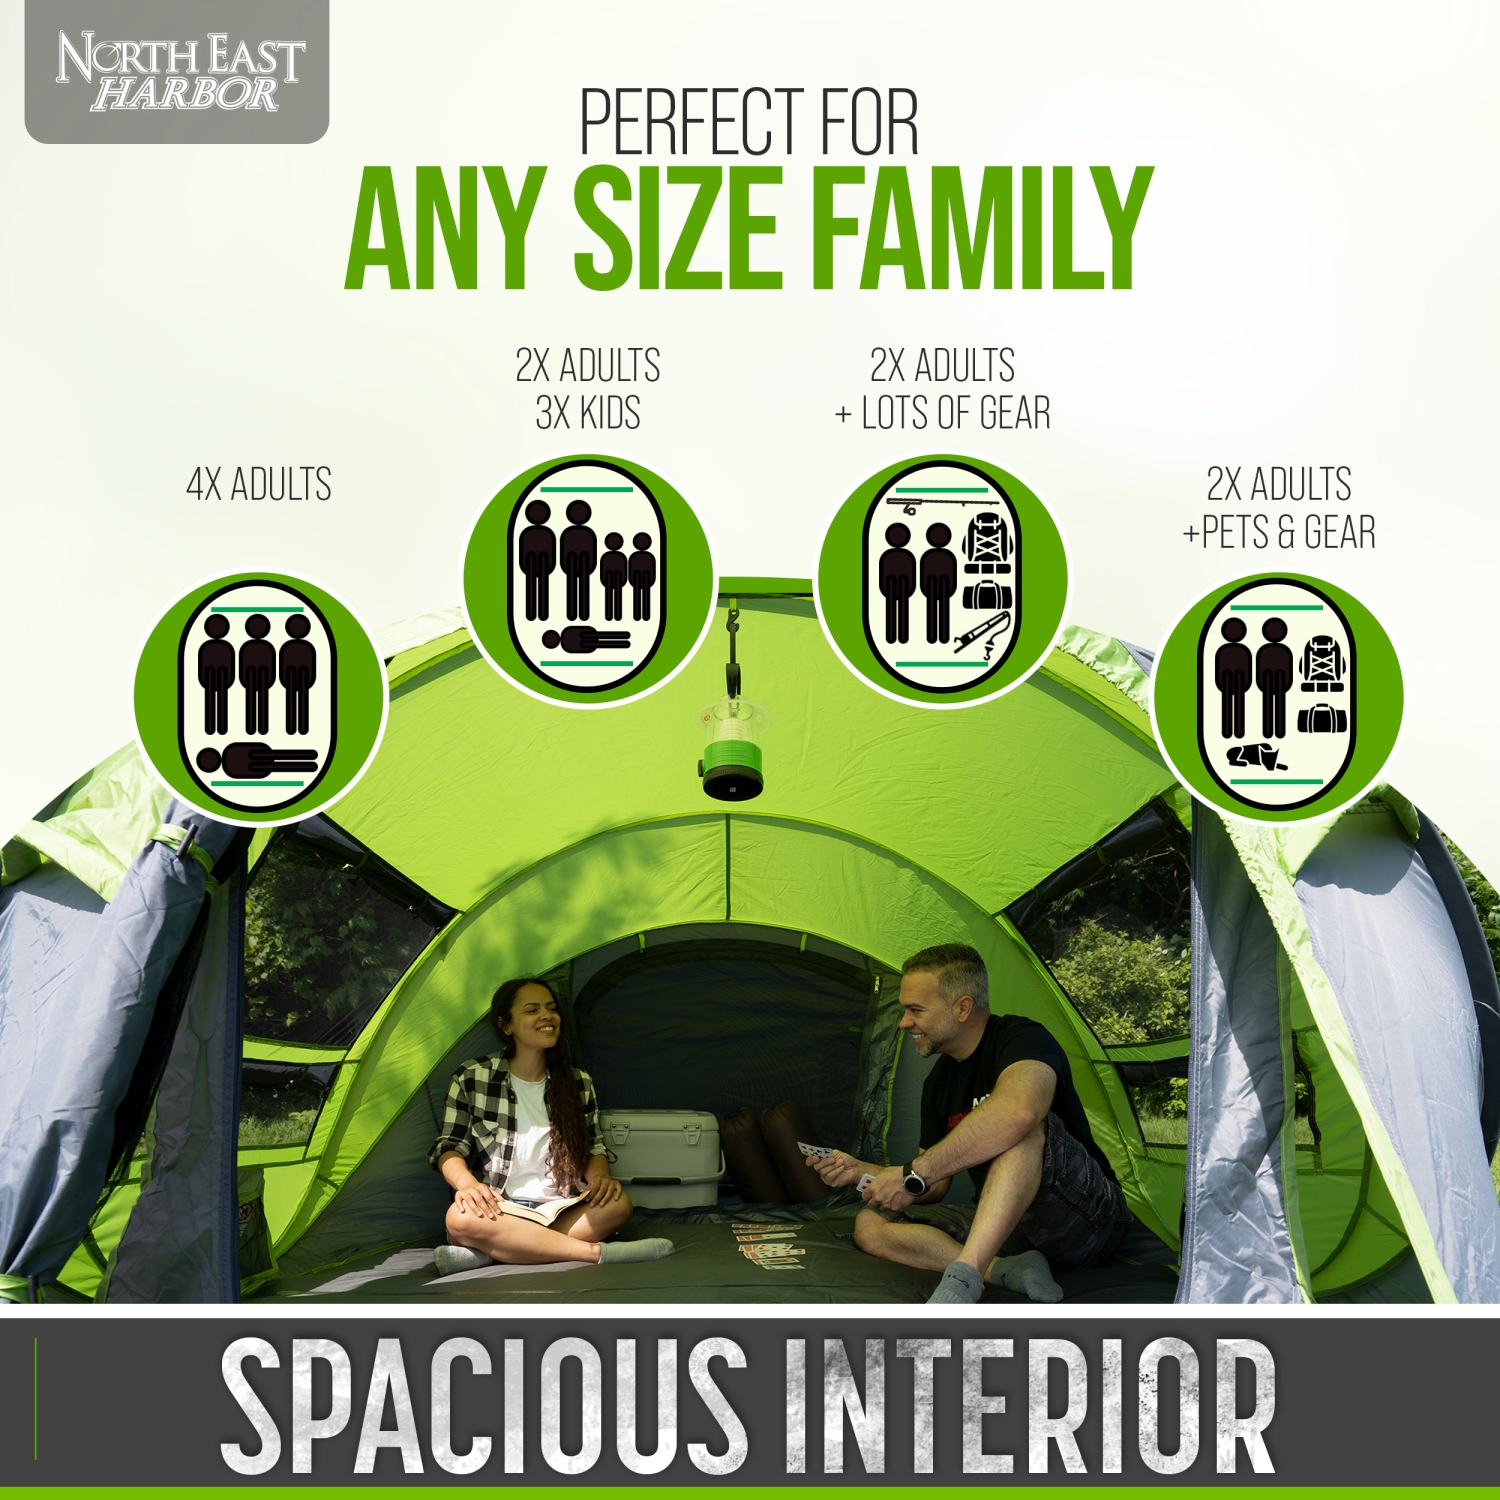 4 Person Easy Pop Up Tent Waterproof Automatic Setup 2 Doors-Instant Family  Tents for Camping Hiking & Traveling